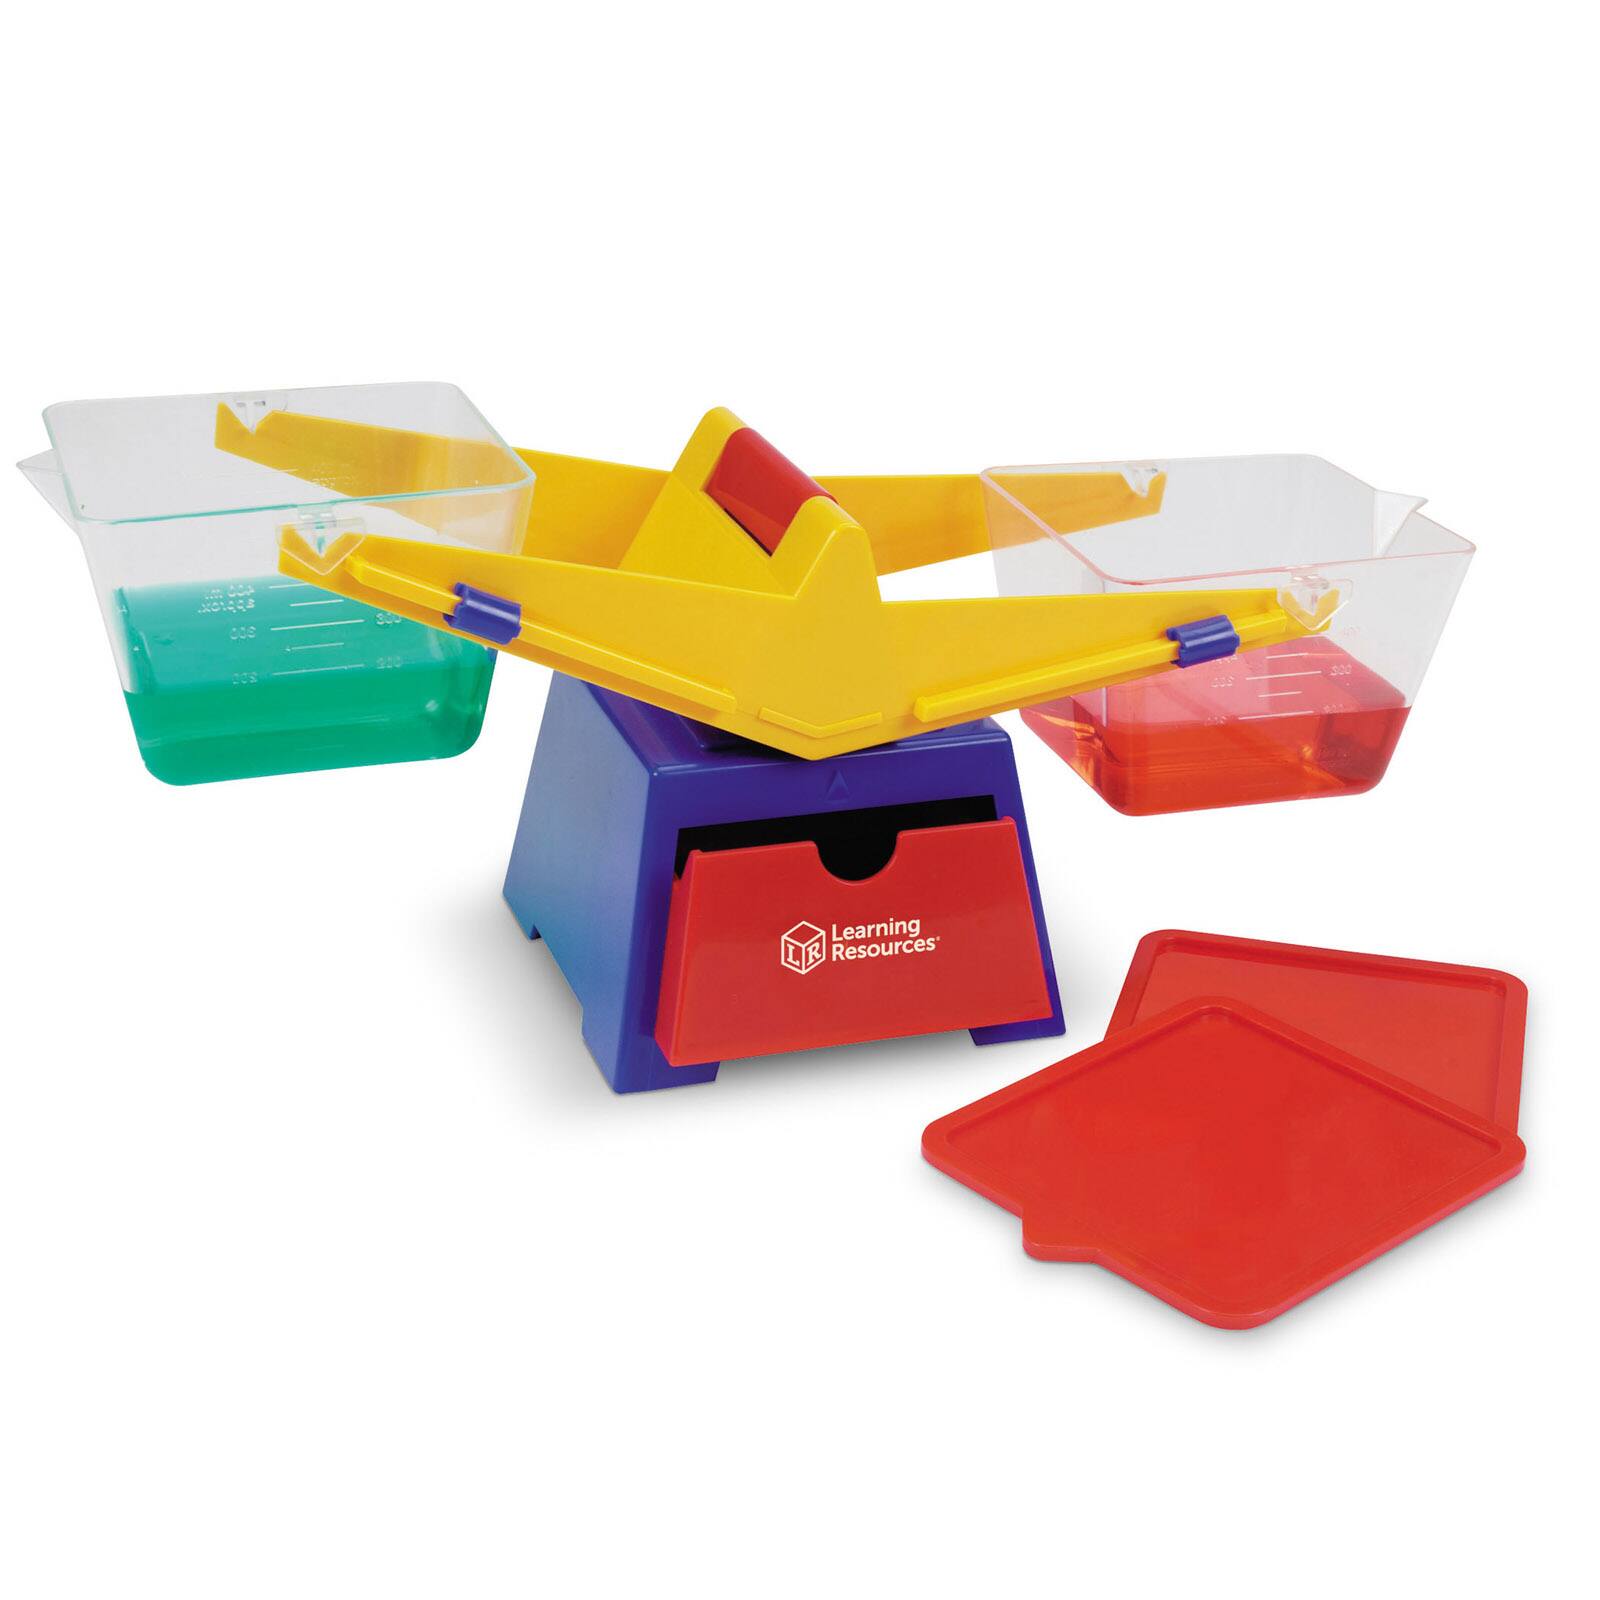 Learning Resources Primary Bucket Balance Scales for sale online 